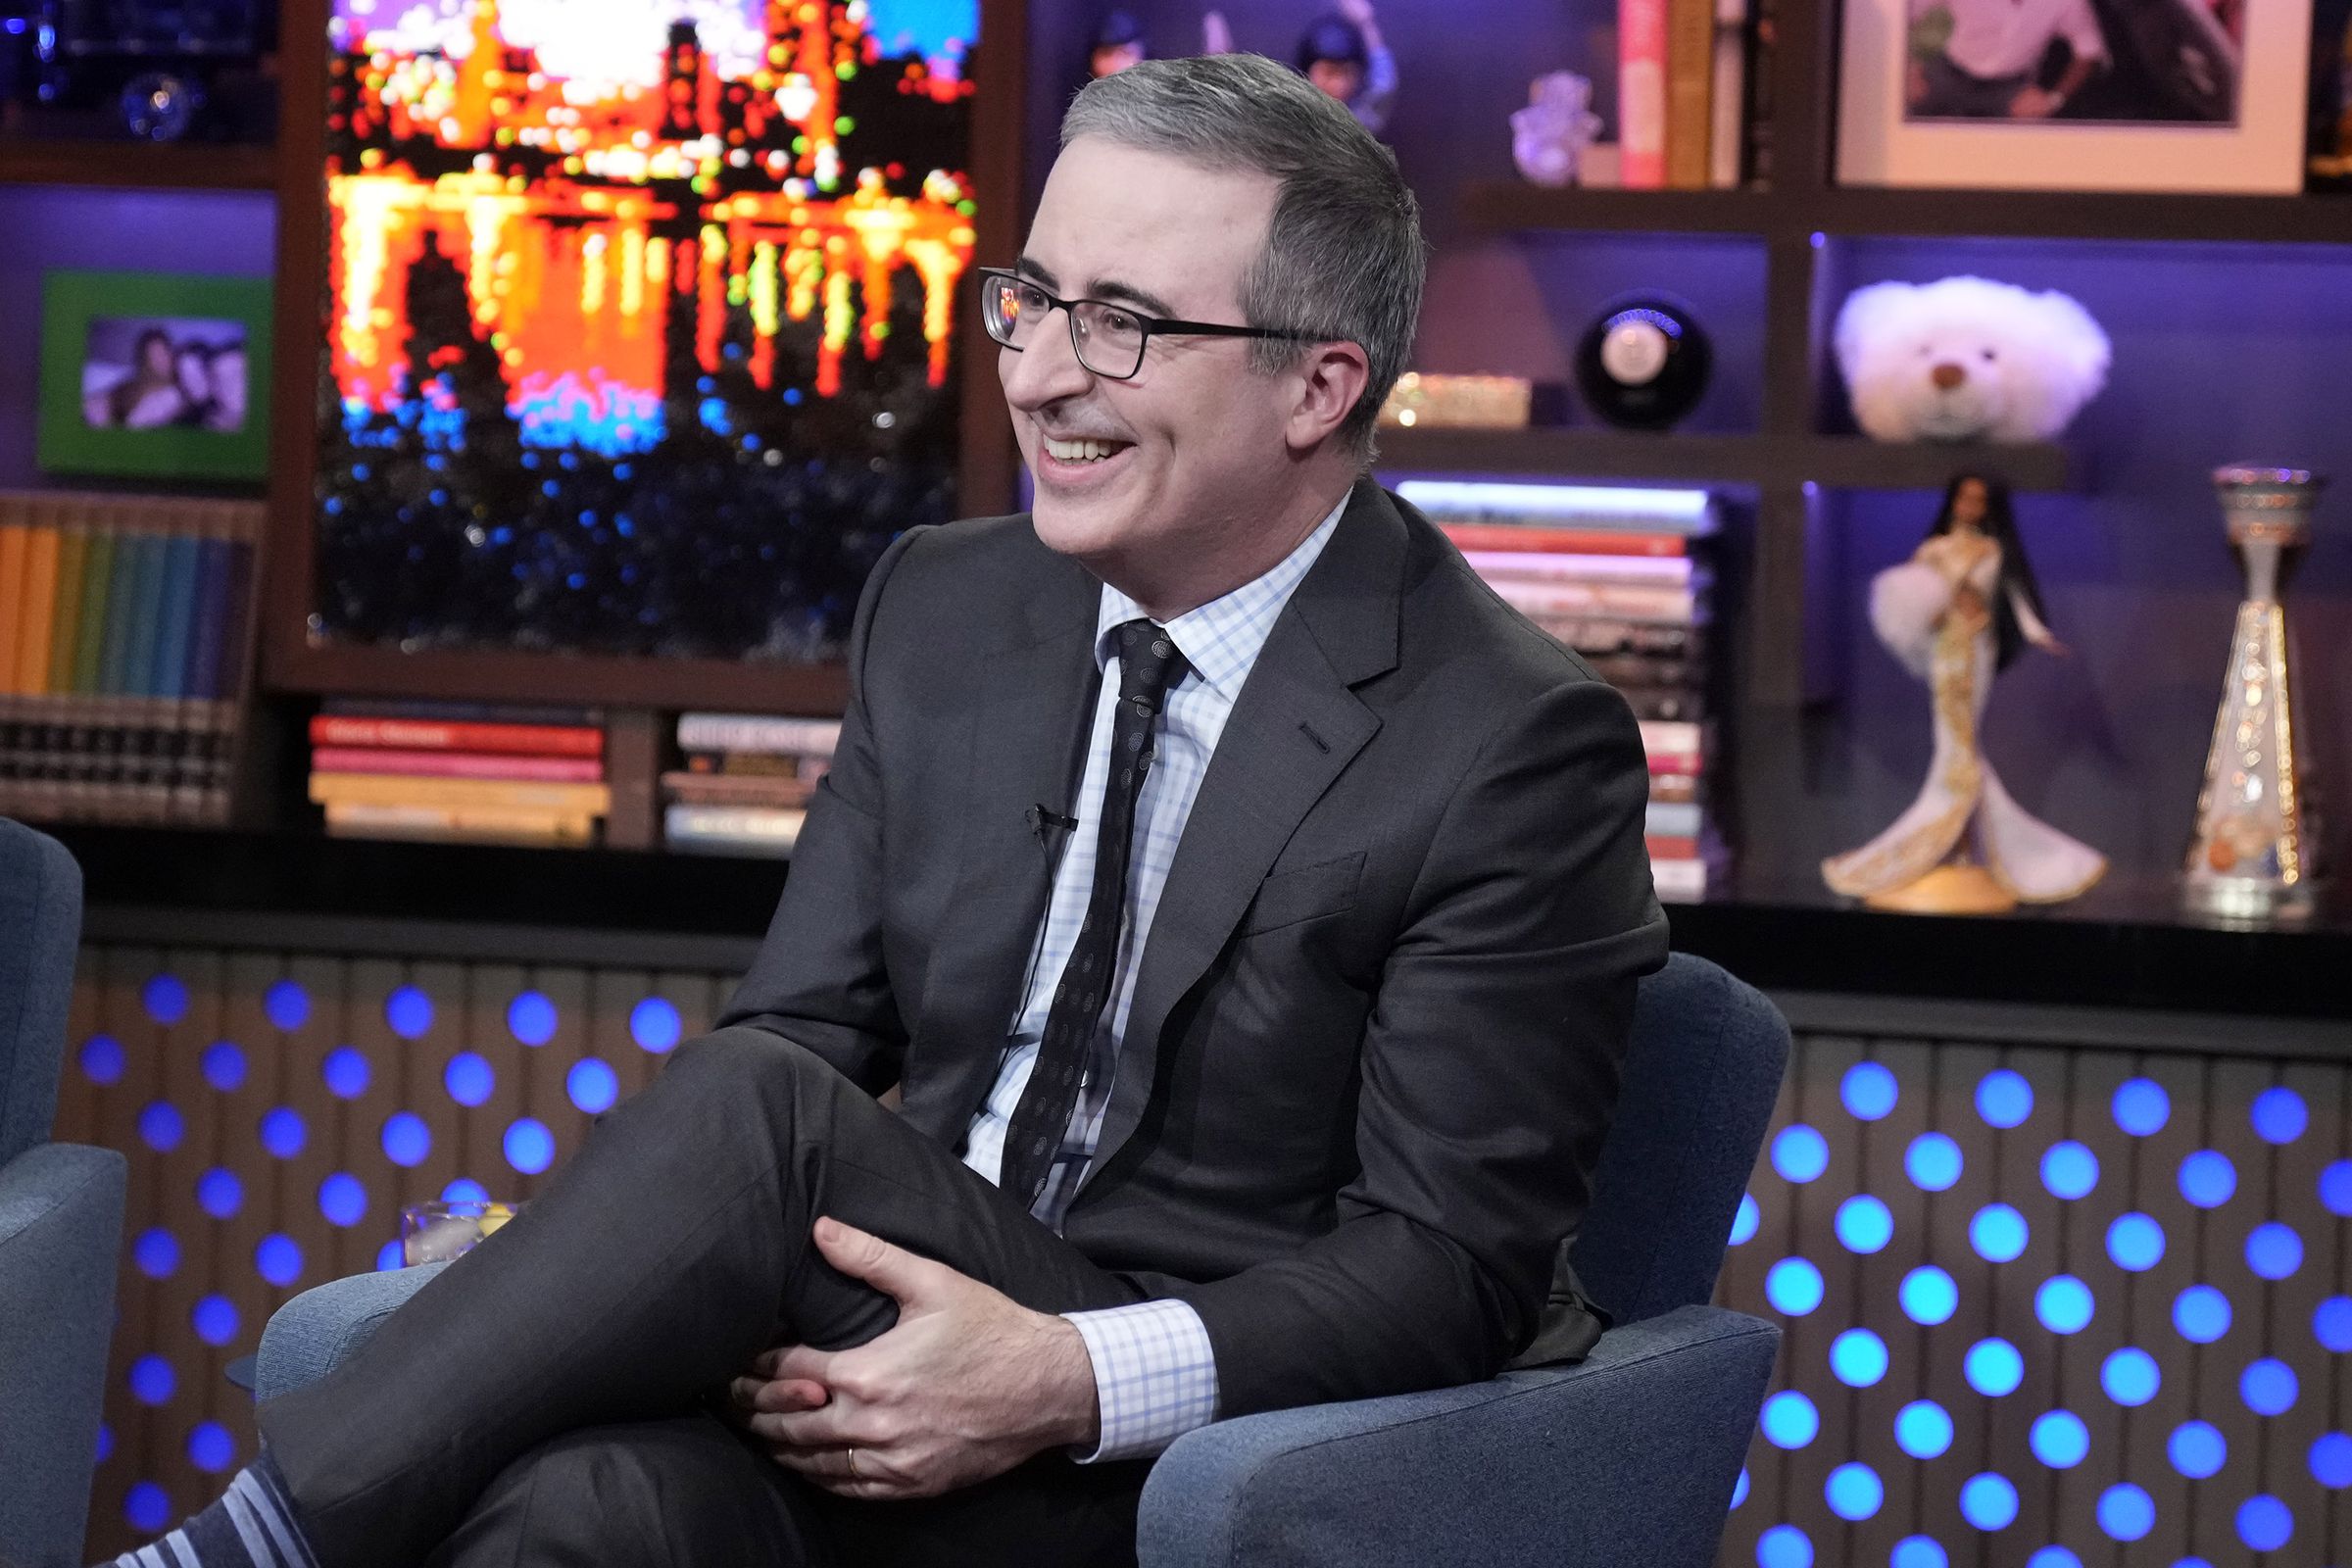 Watch What Happens Live With Andy Cohen - Season 20